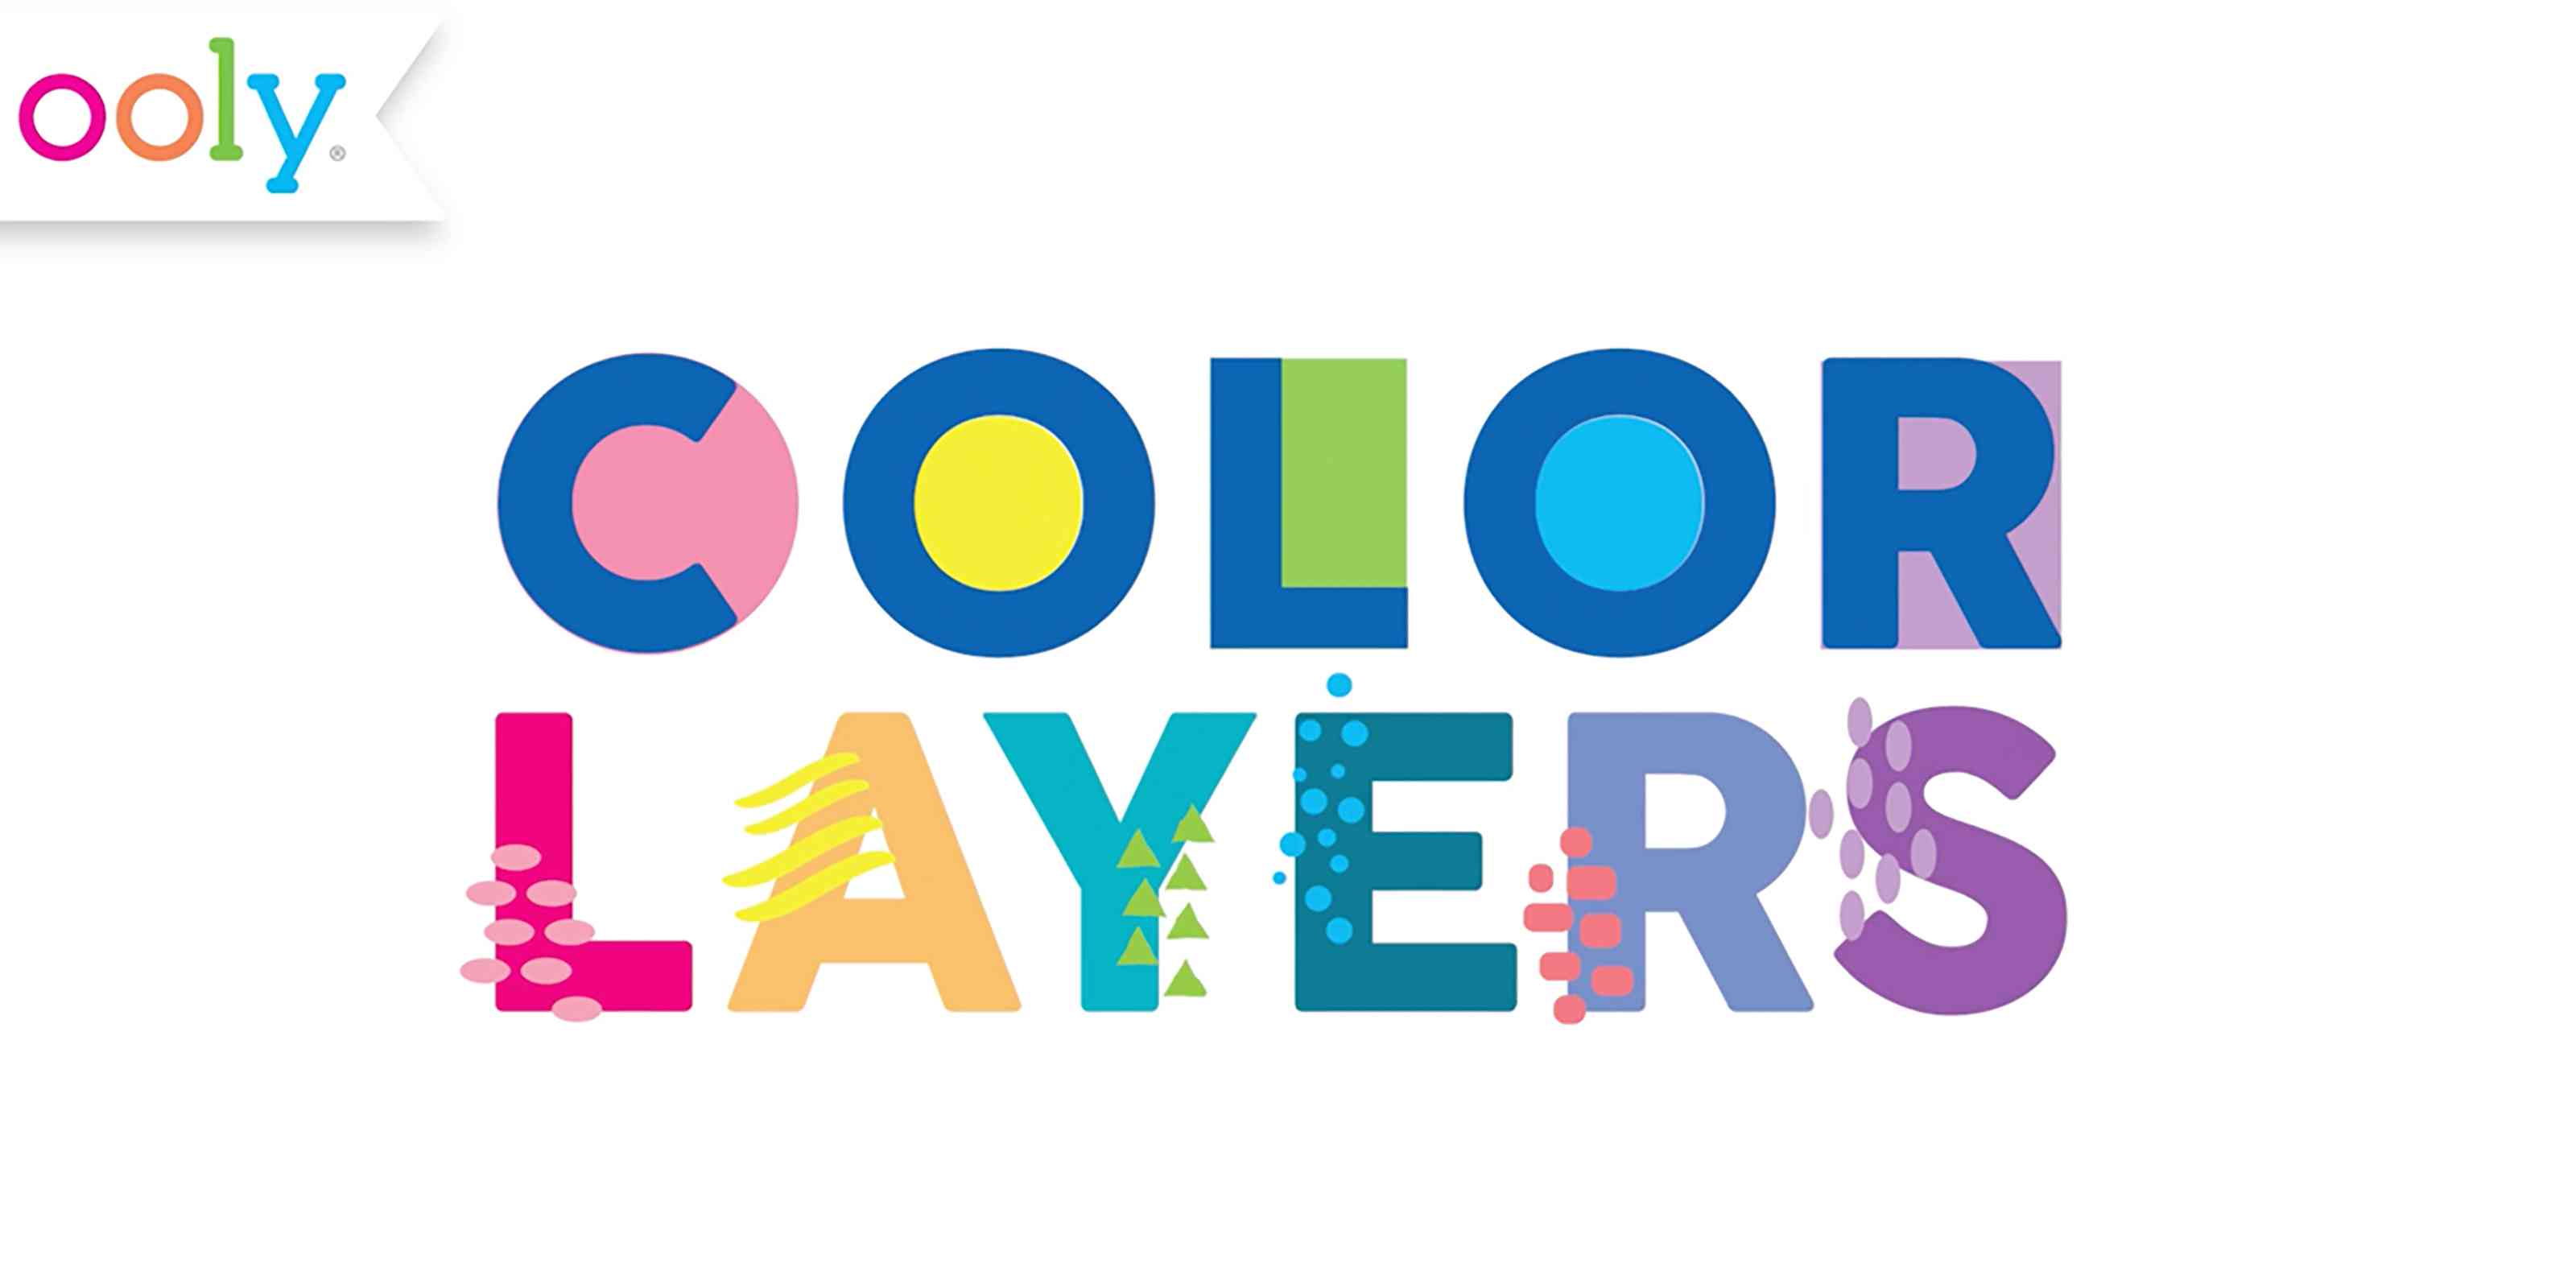 https://www.ooly.com/cdn/shop/files/OOLY_Color_Layers_Double_Ended_Layering_Markers_YouTube_Video_Image_3200x1600_b35a417e-4b8e-4bf8-b505-28da52d544cc.jpg?v=1692909381&width=3200